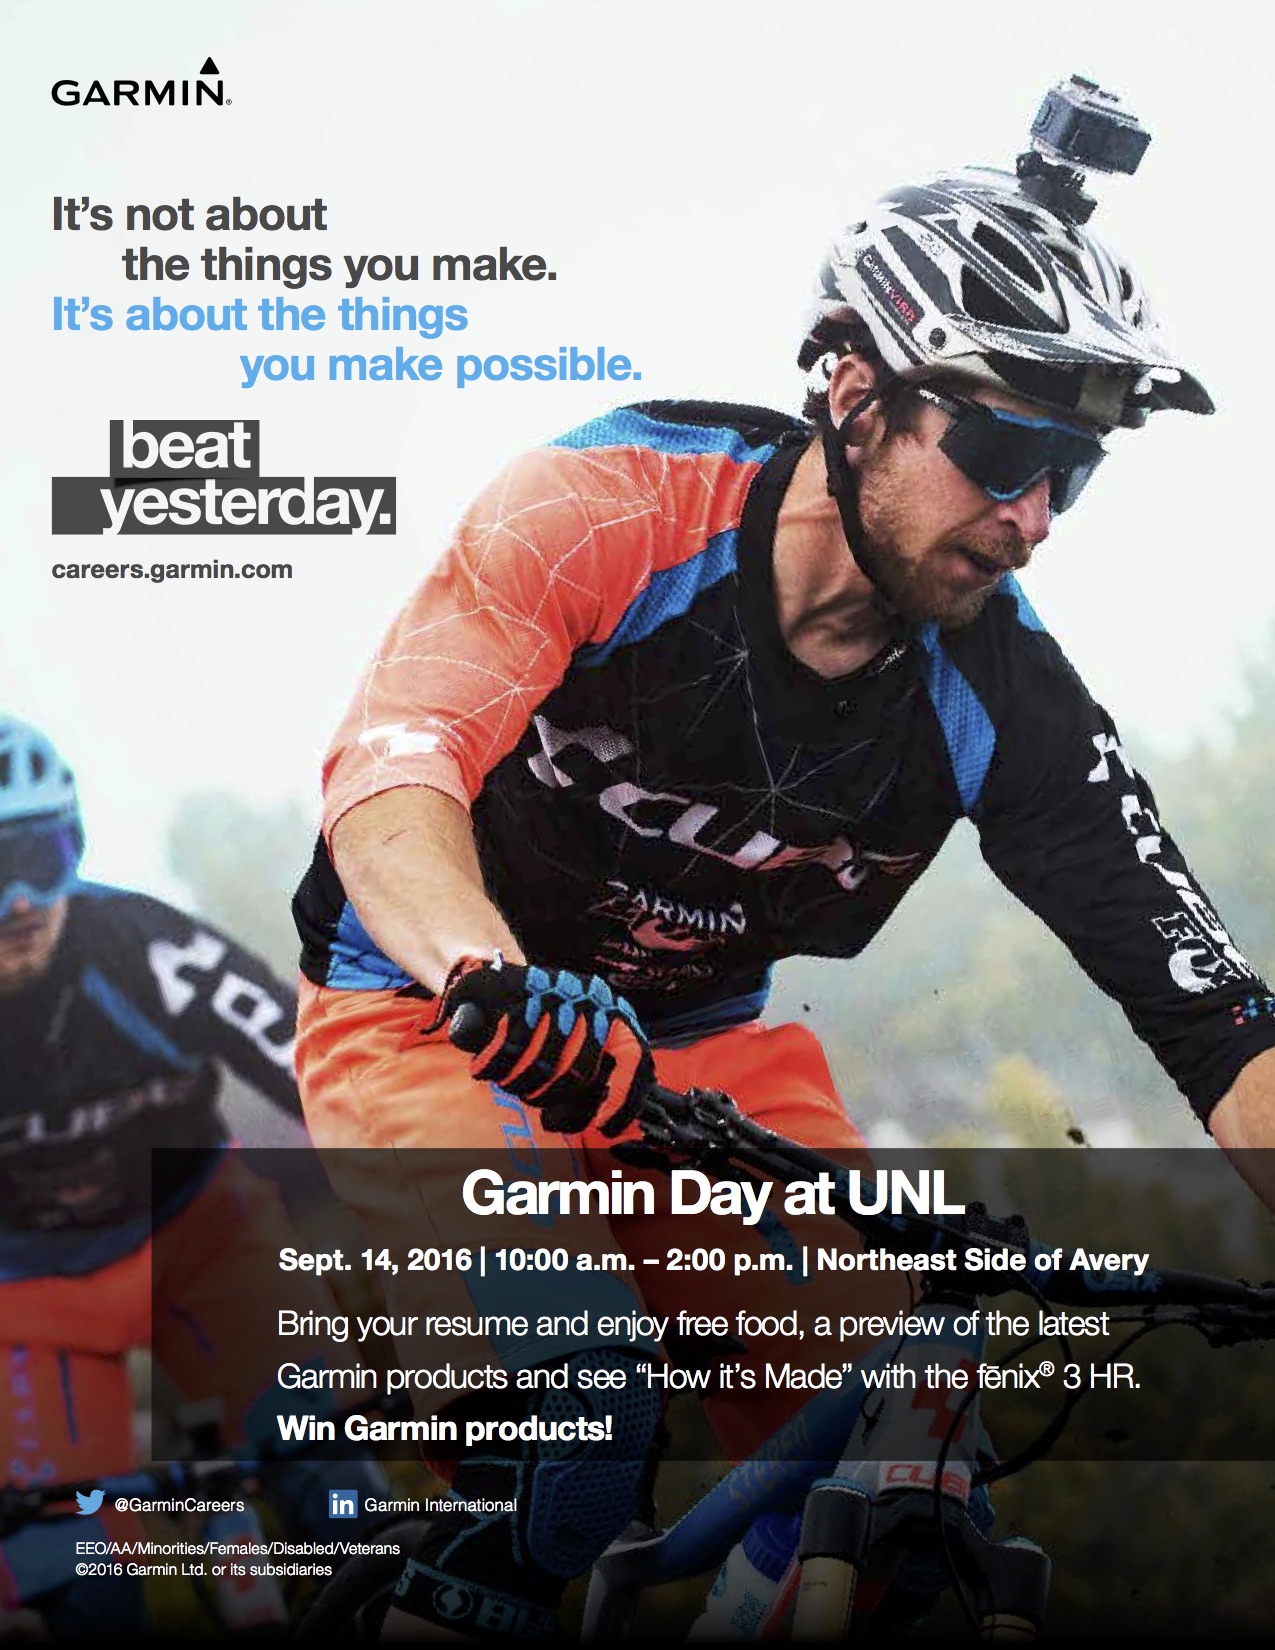 Garmin Day is today!